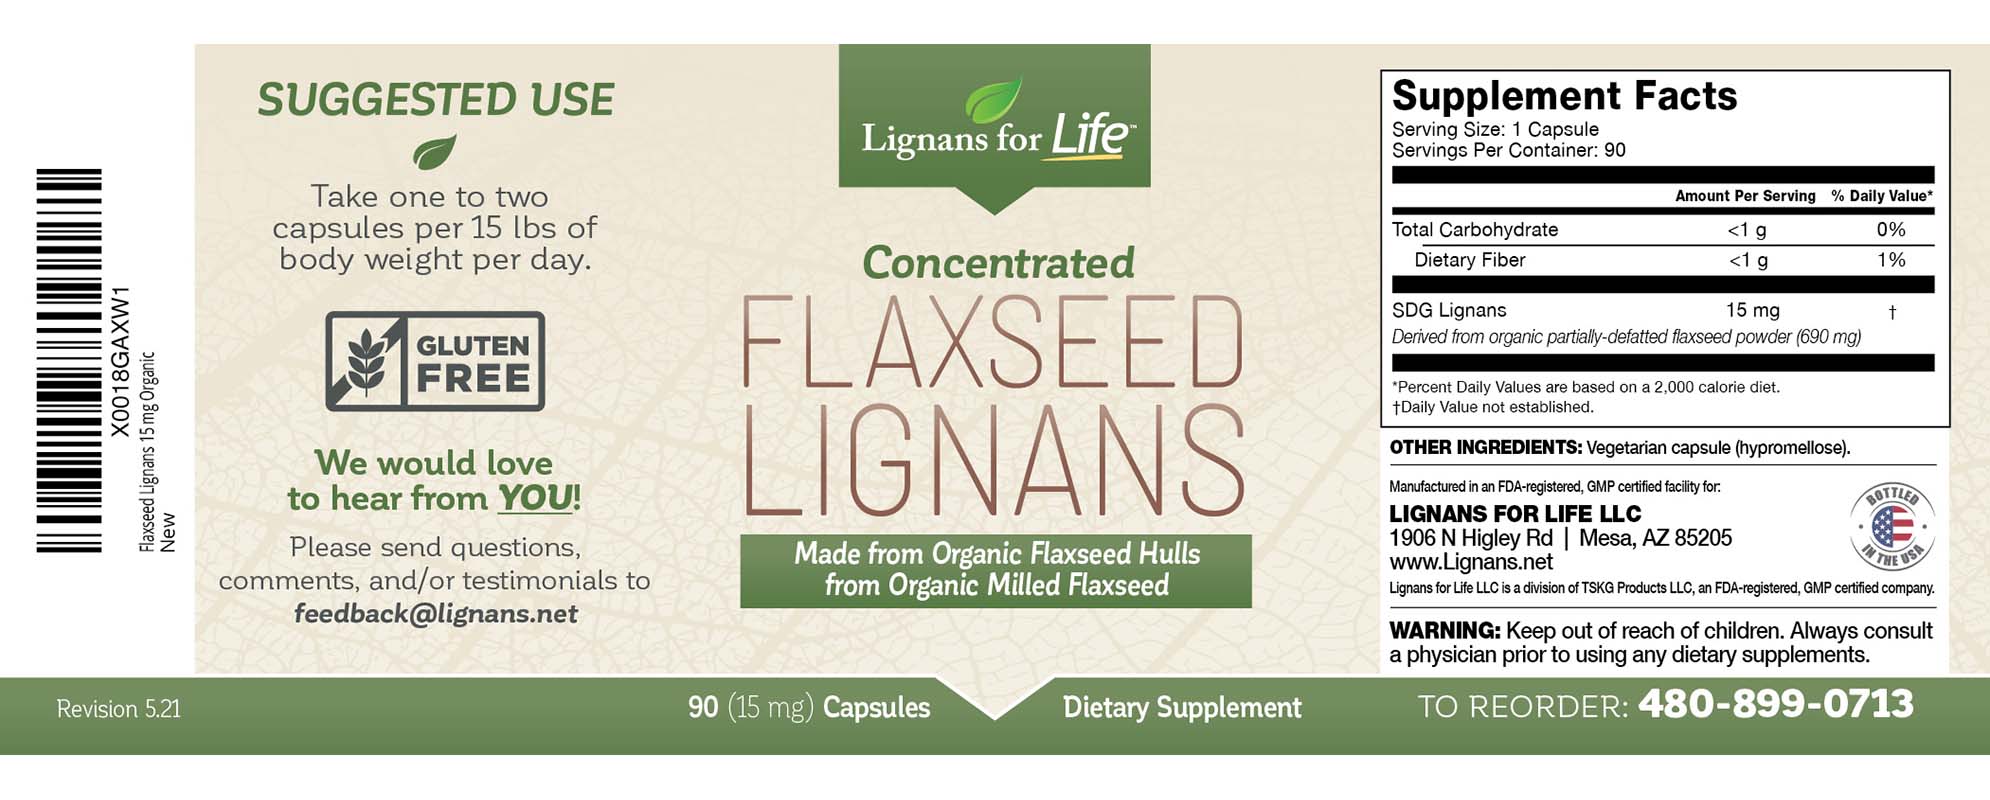 Lignans for Life Flaxseed Lignans 15mg Label Rev.5.21